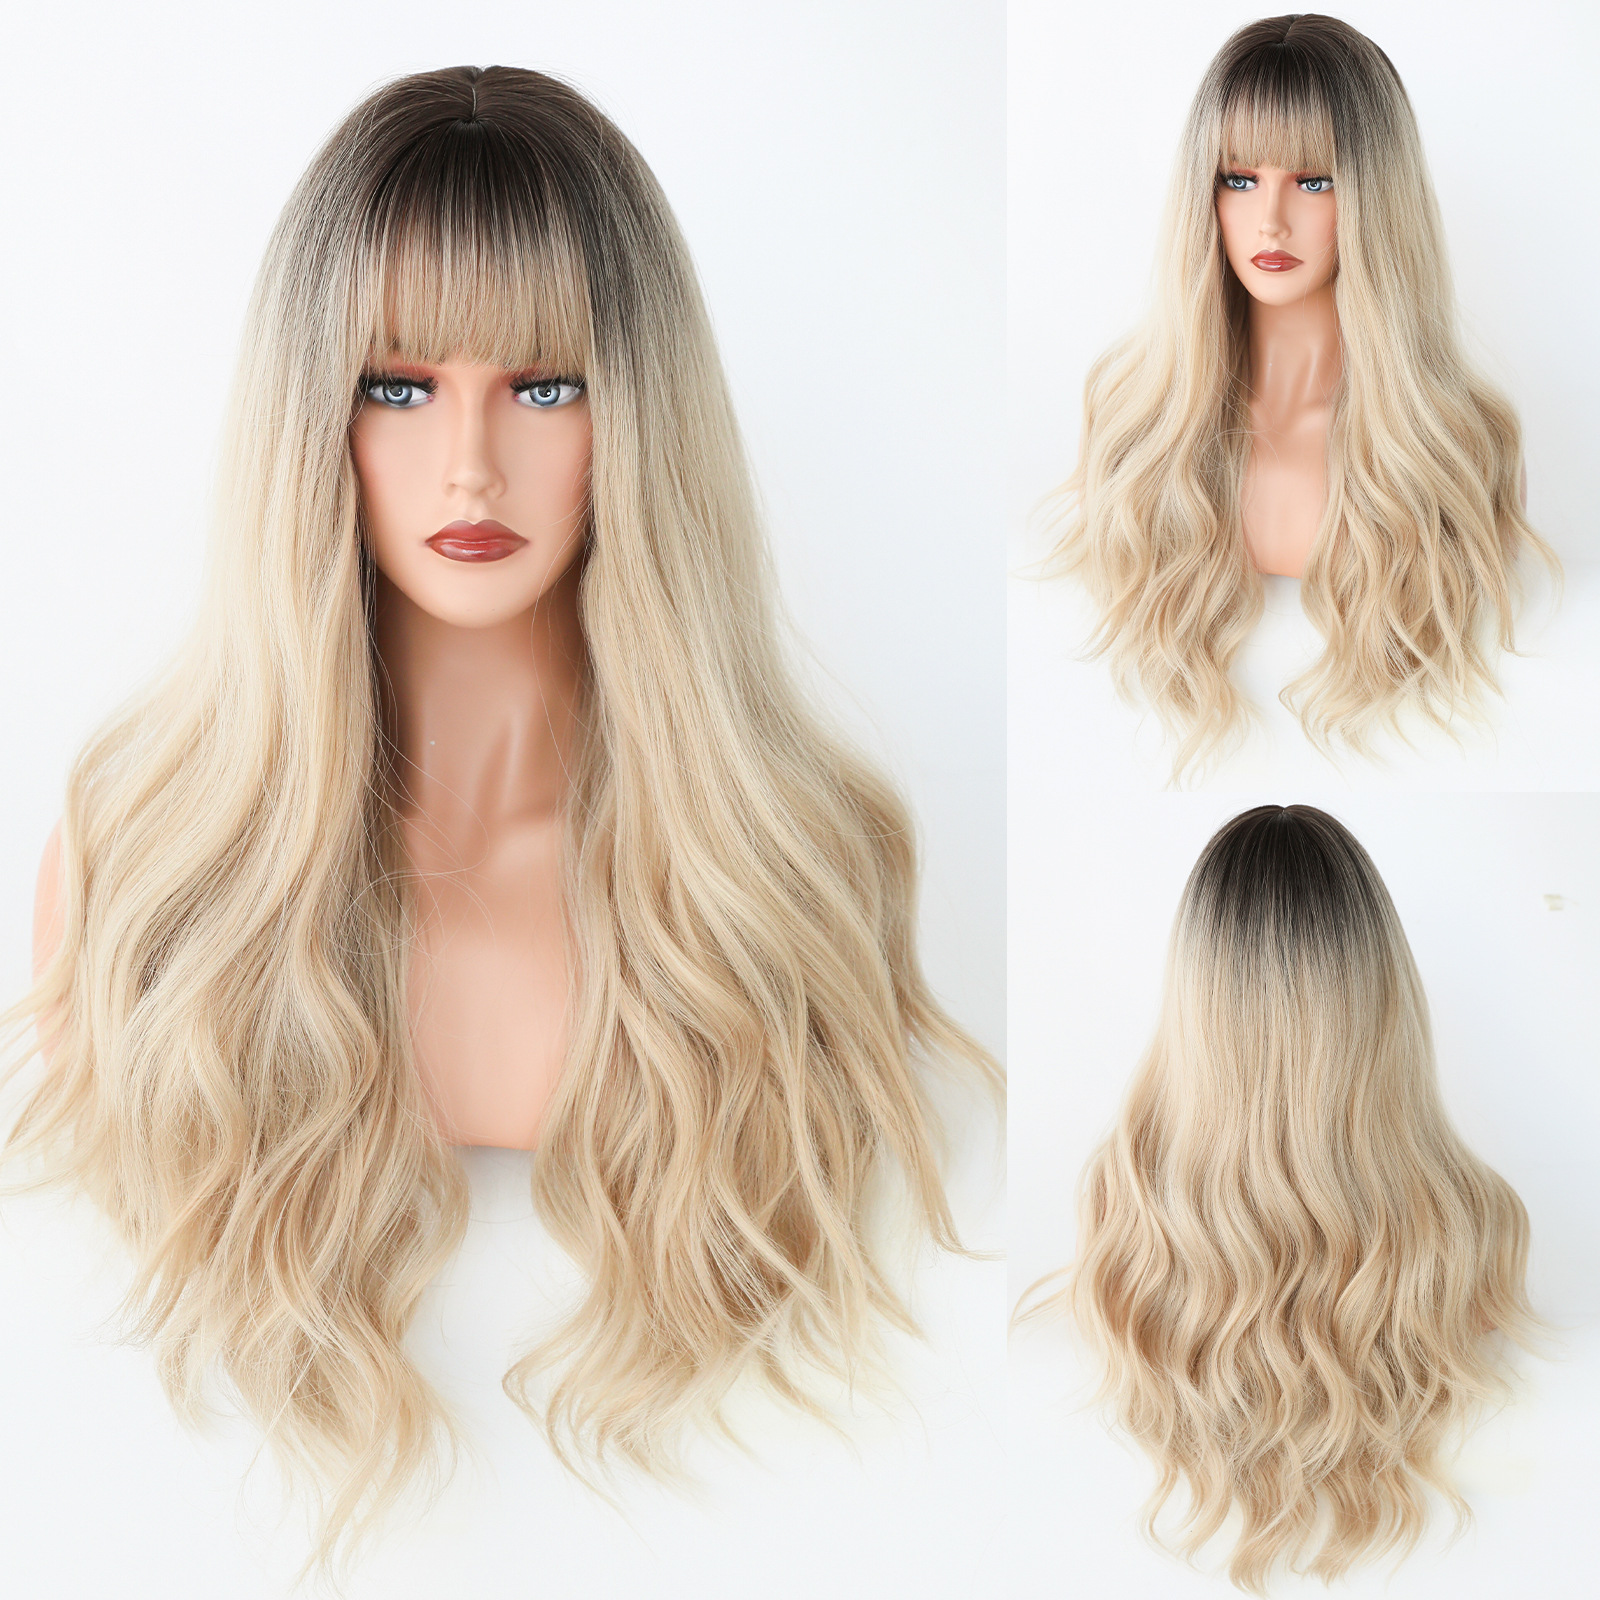 Fashionable synthetic wig from Yinraohair in brown with headband gradient, showcasing long curly hair and fashionable layered bangs, ready to go